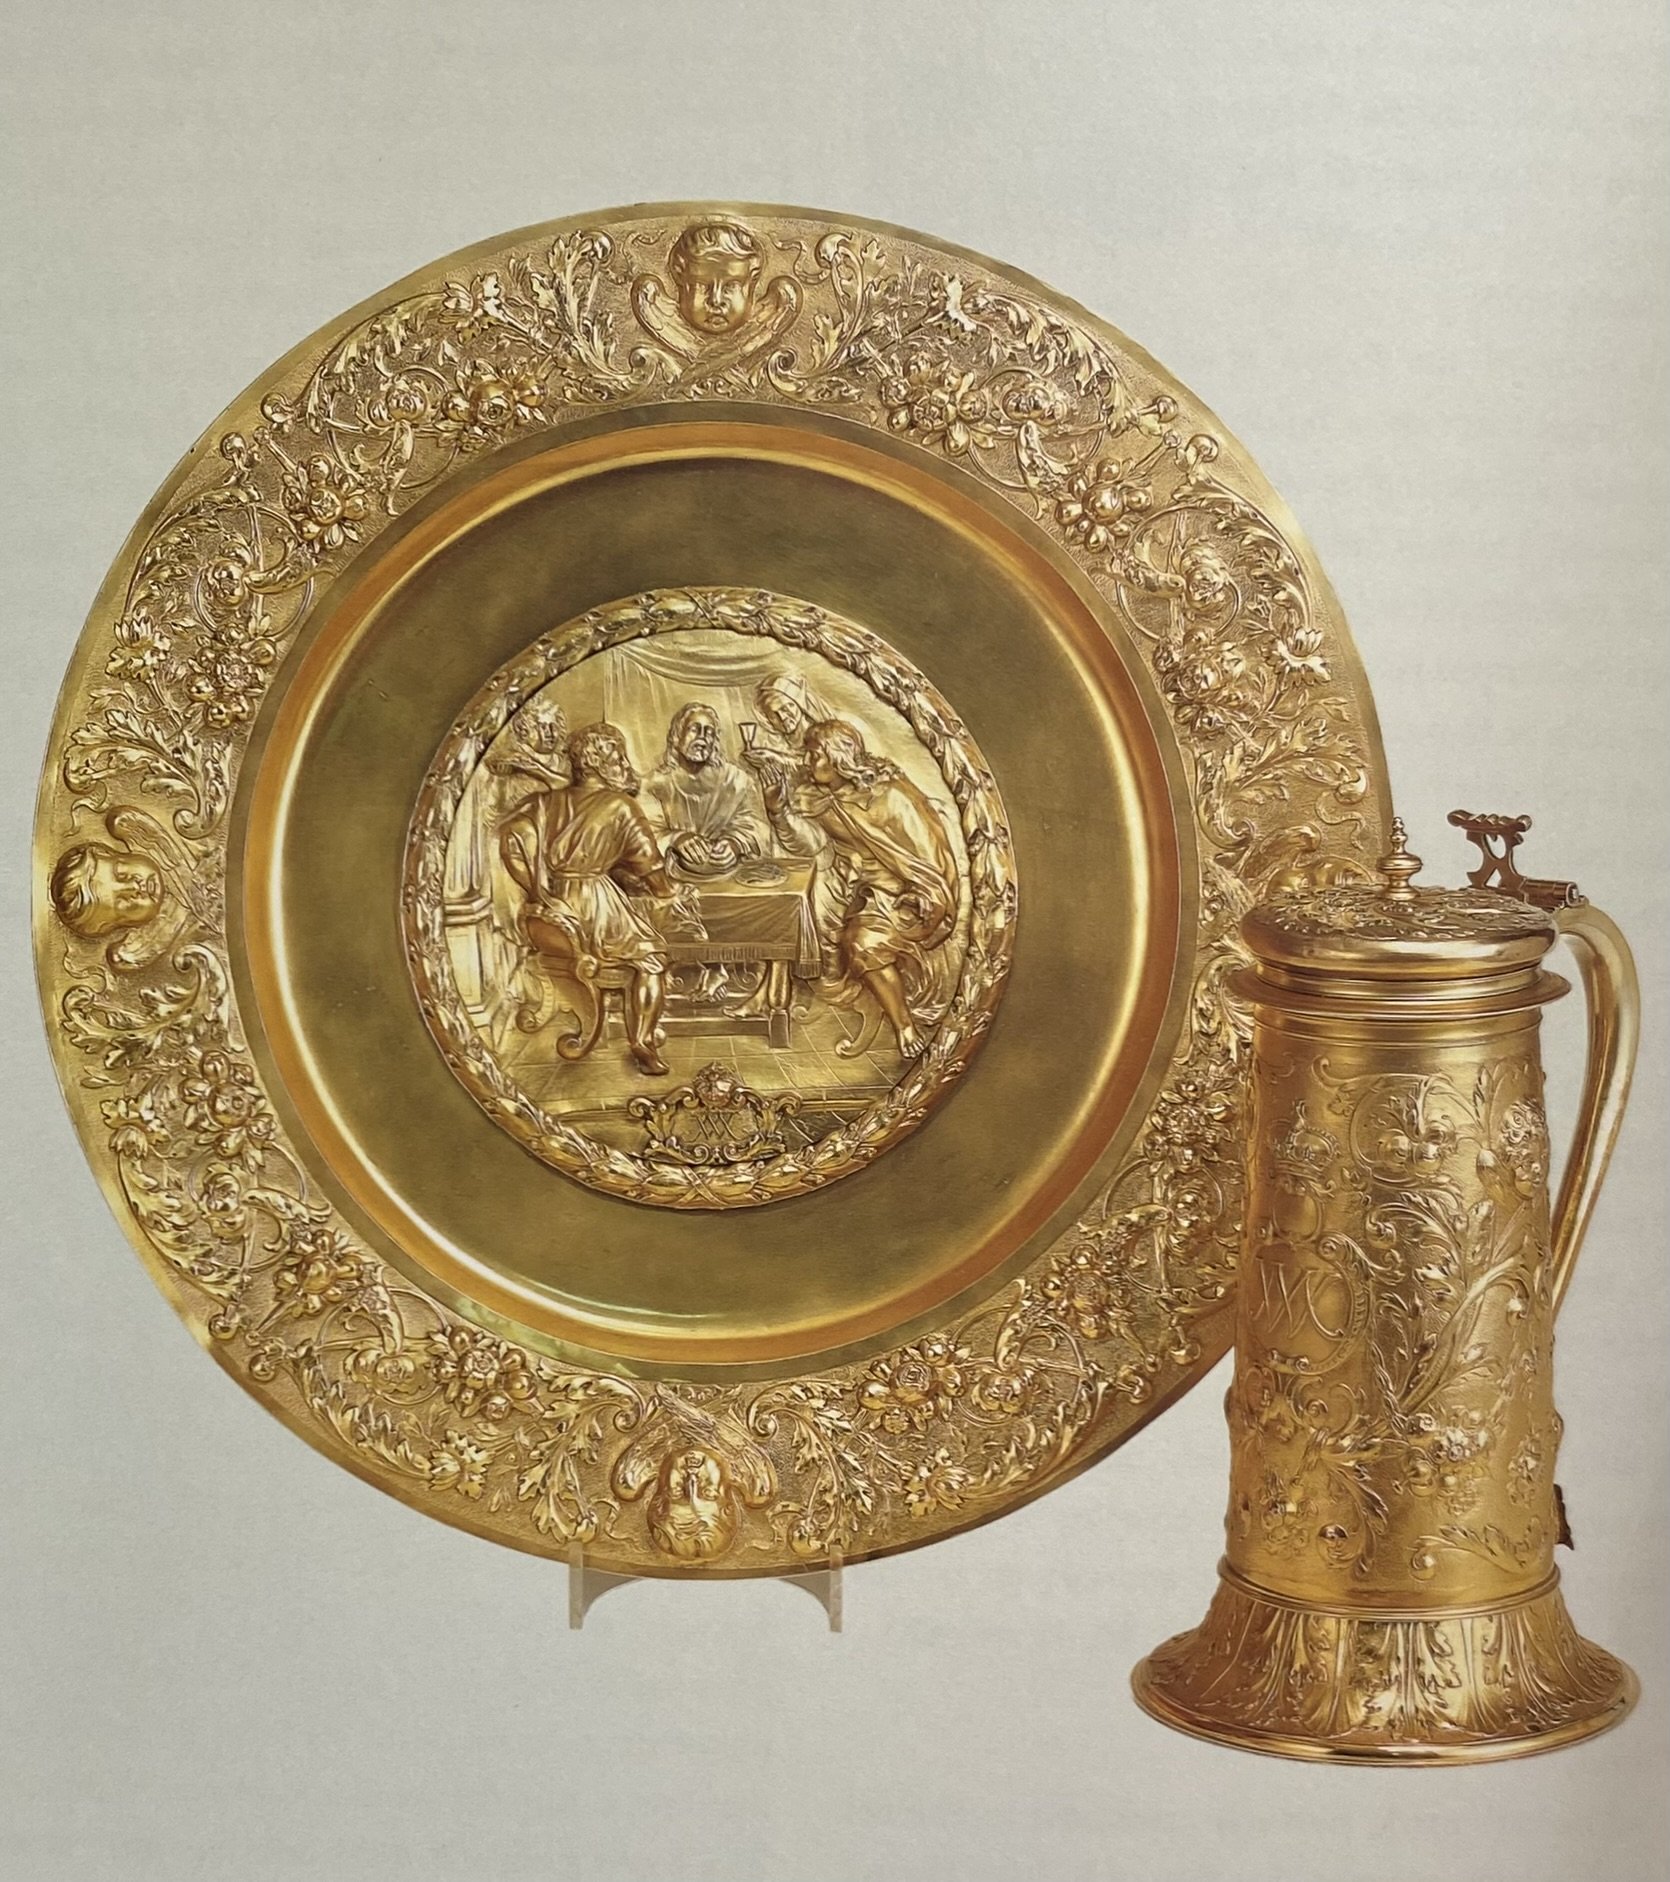 Altar dish with the Supper at Emmaus and the William and Mary flagon